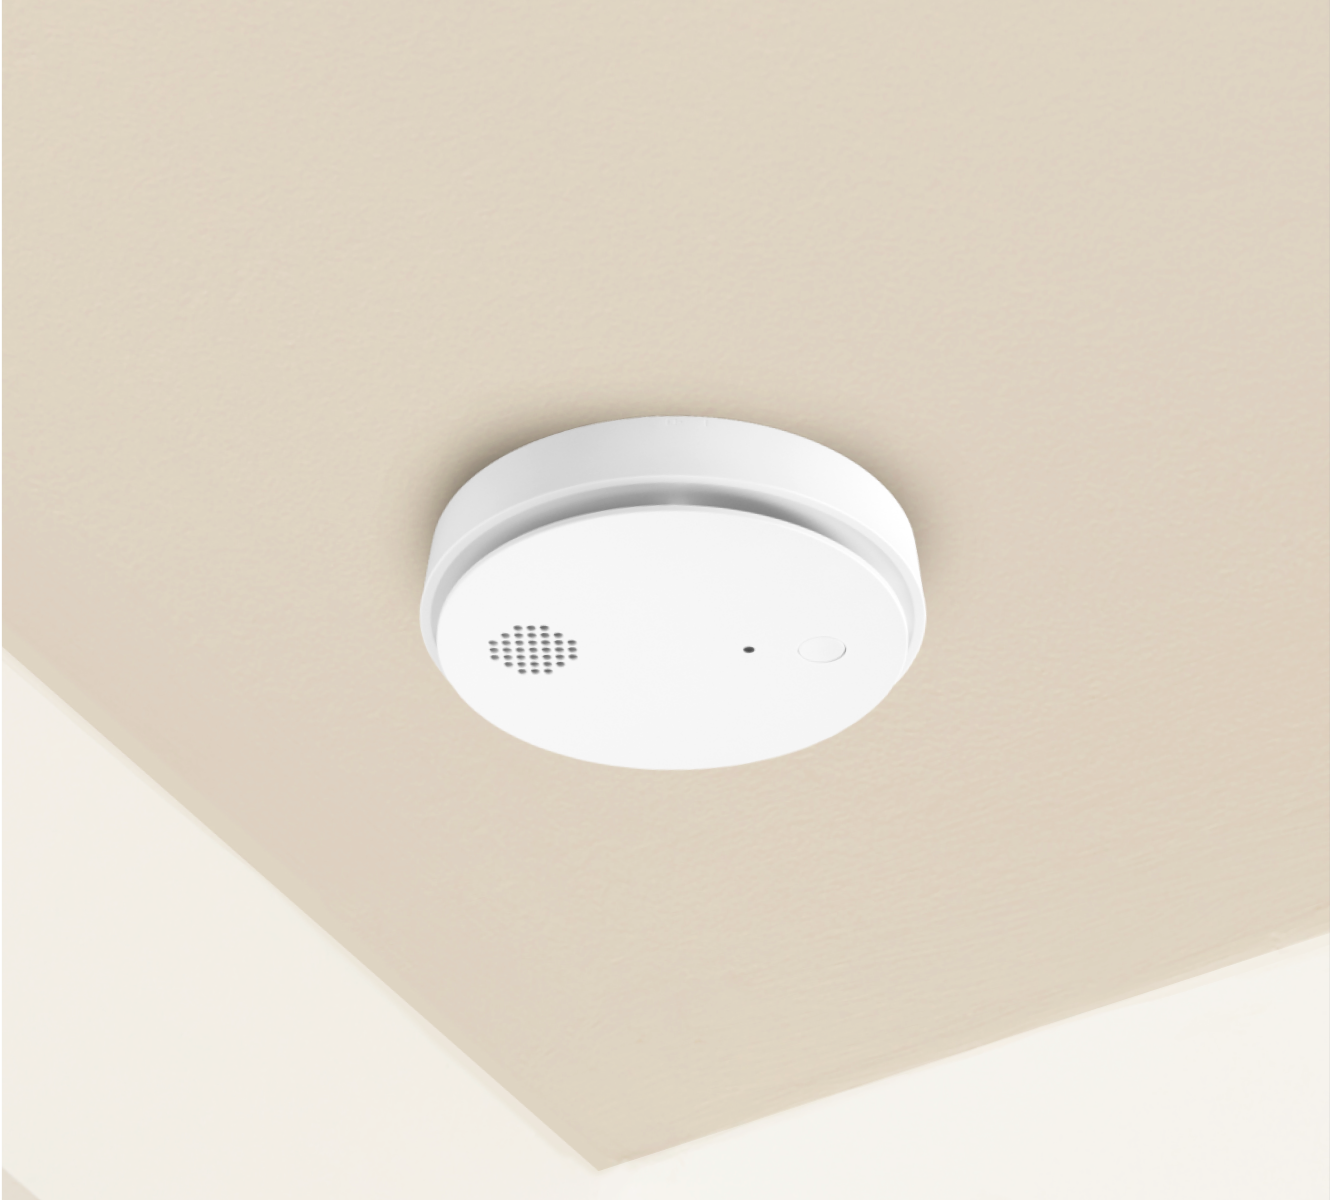 Carbon Monoxide Detector installed on a ceiling in a home